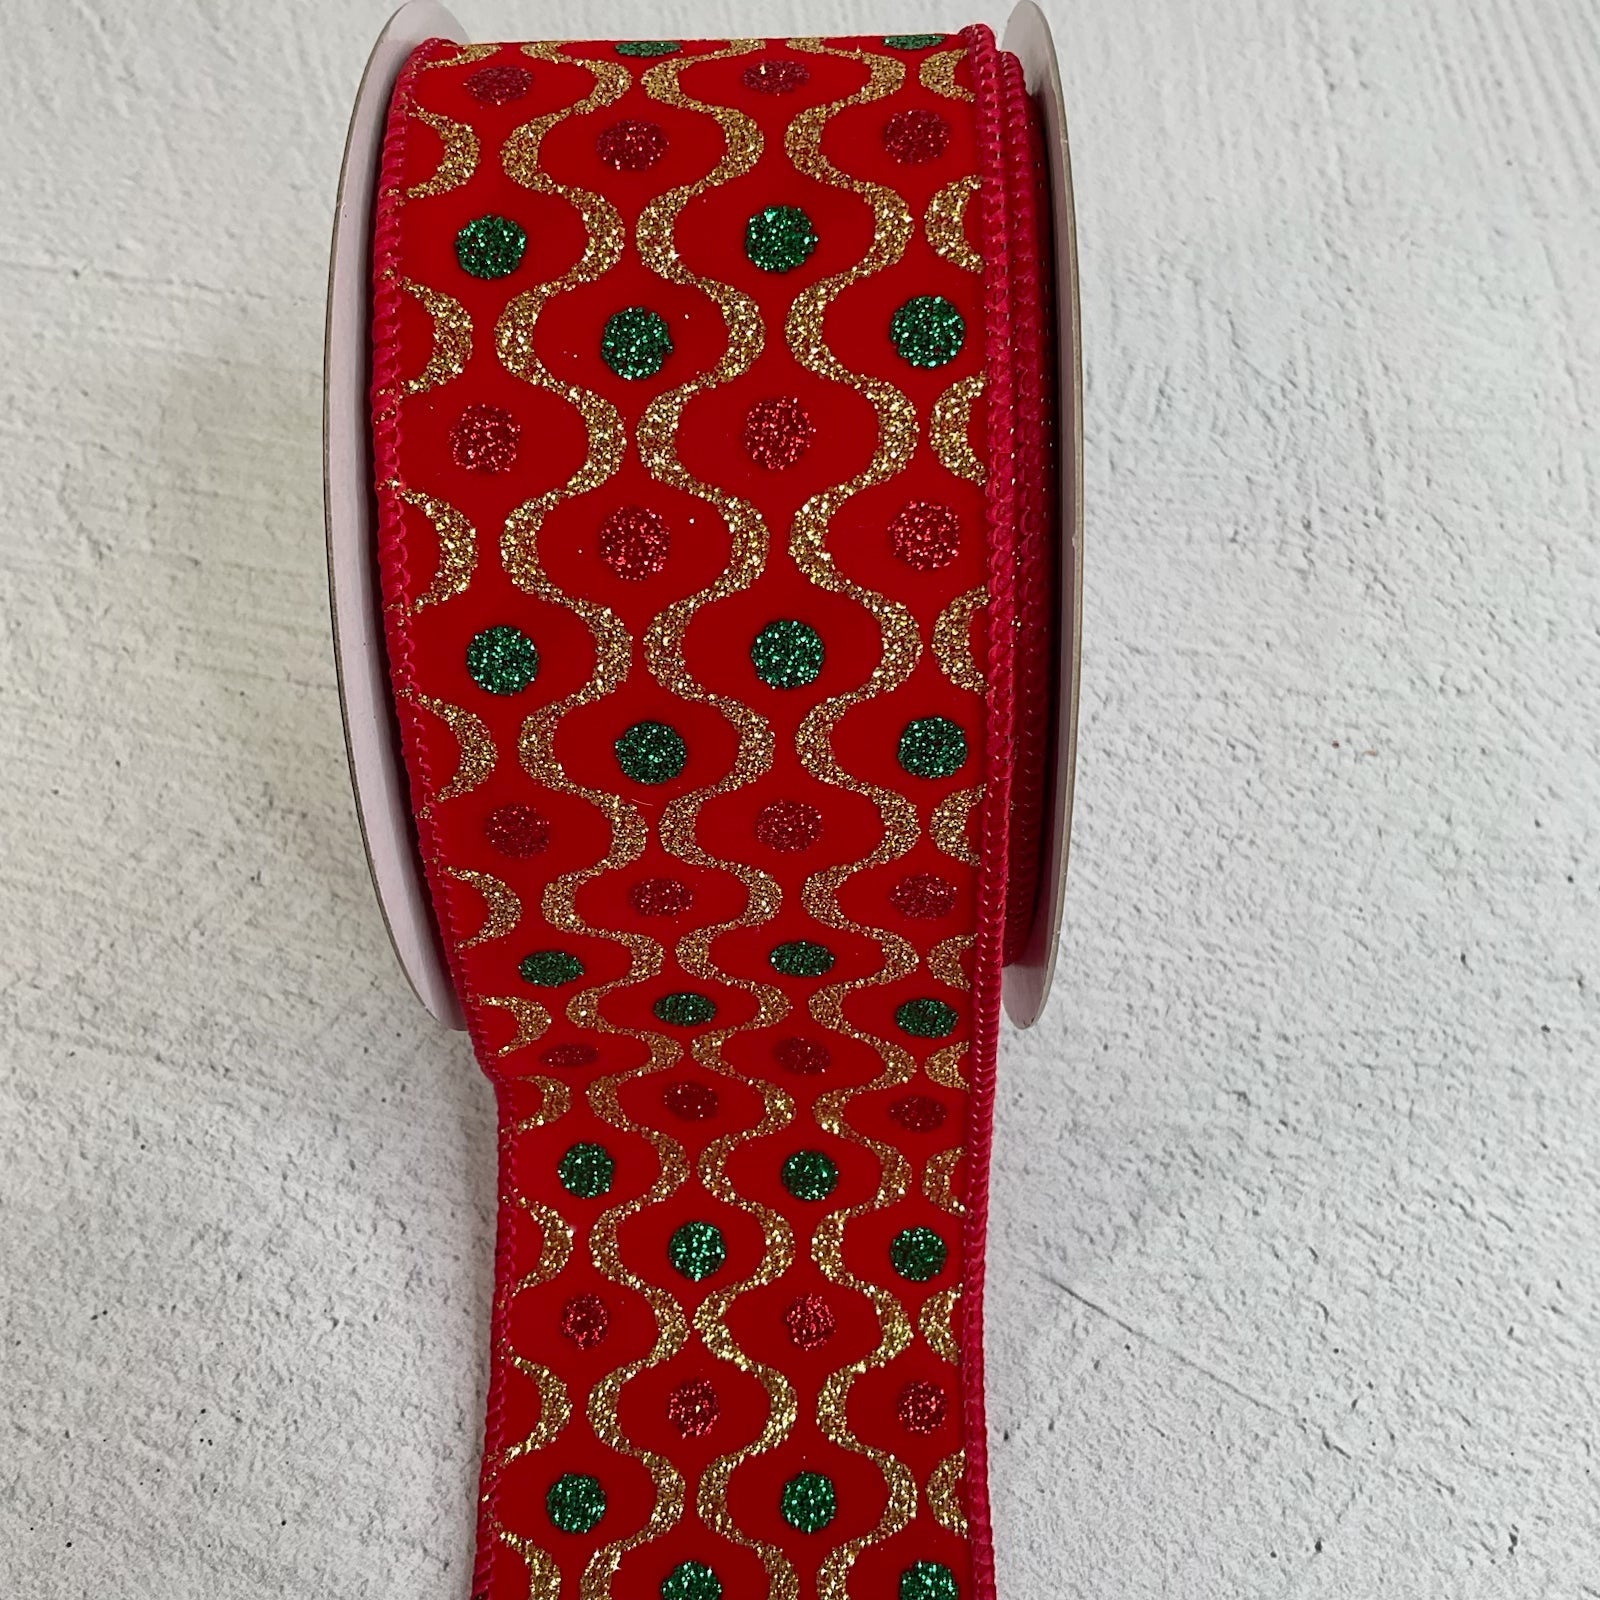 Red and Green dot on red velvet with gold accent - Greenery Marketwired ribbon177387